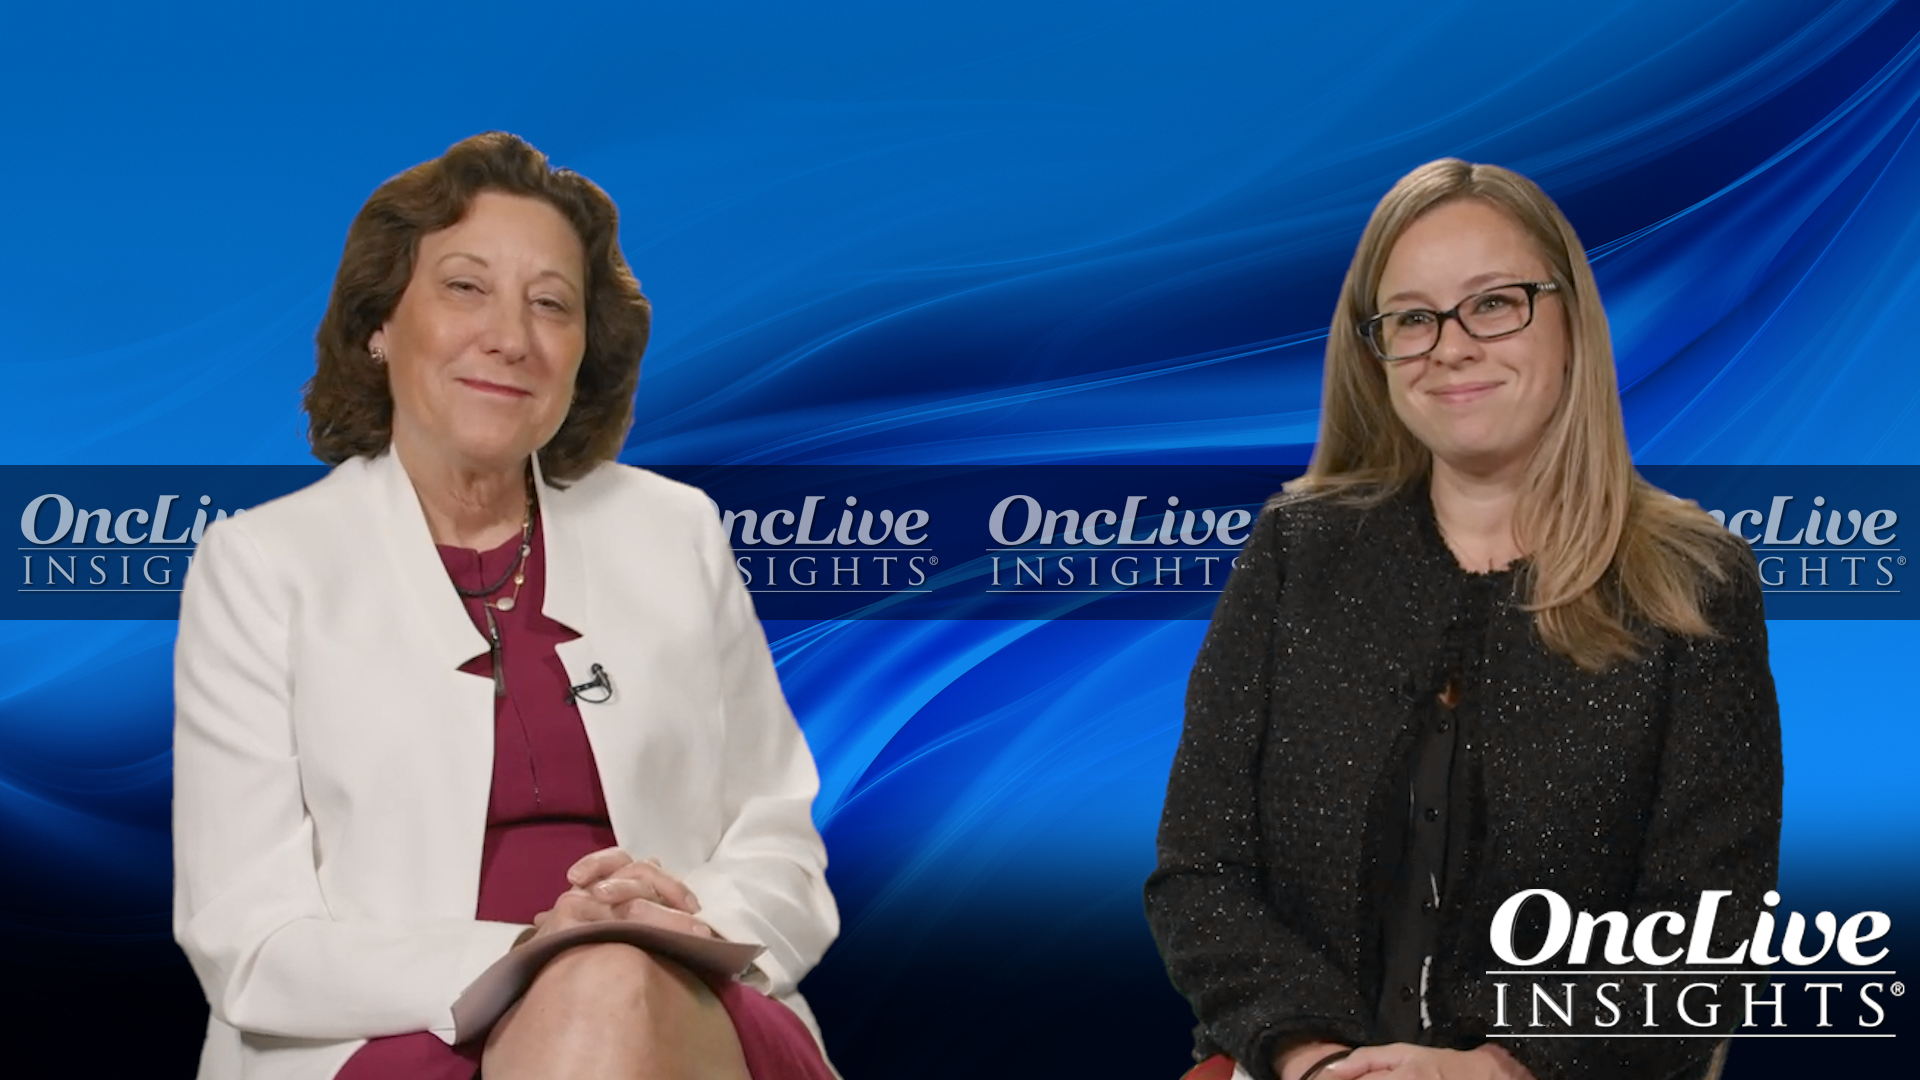 Video 3 - "5-Year Data from the MonarchE Trial Investigating Abemaciclib in HR+, HER2- High-Risk, Early Breast Cancer"